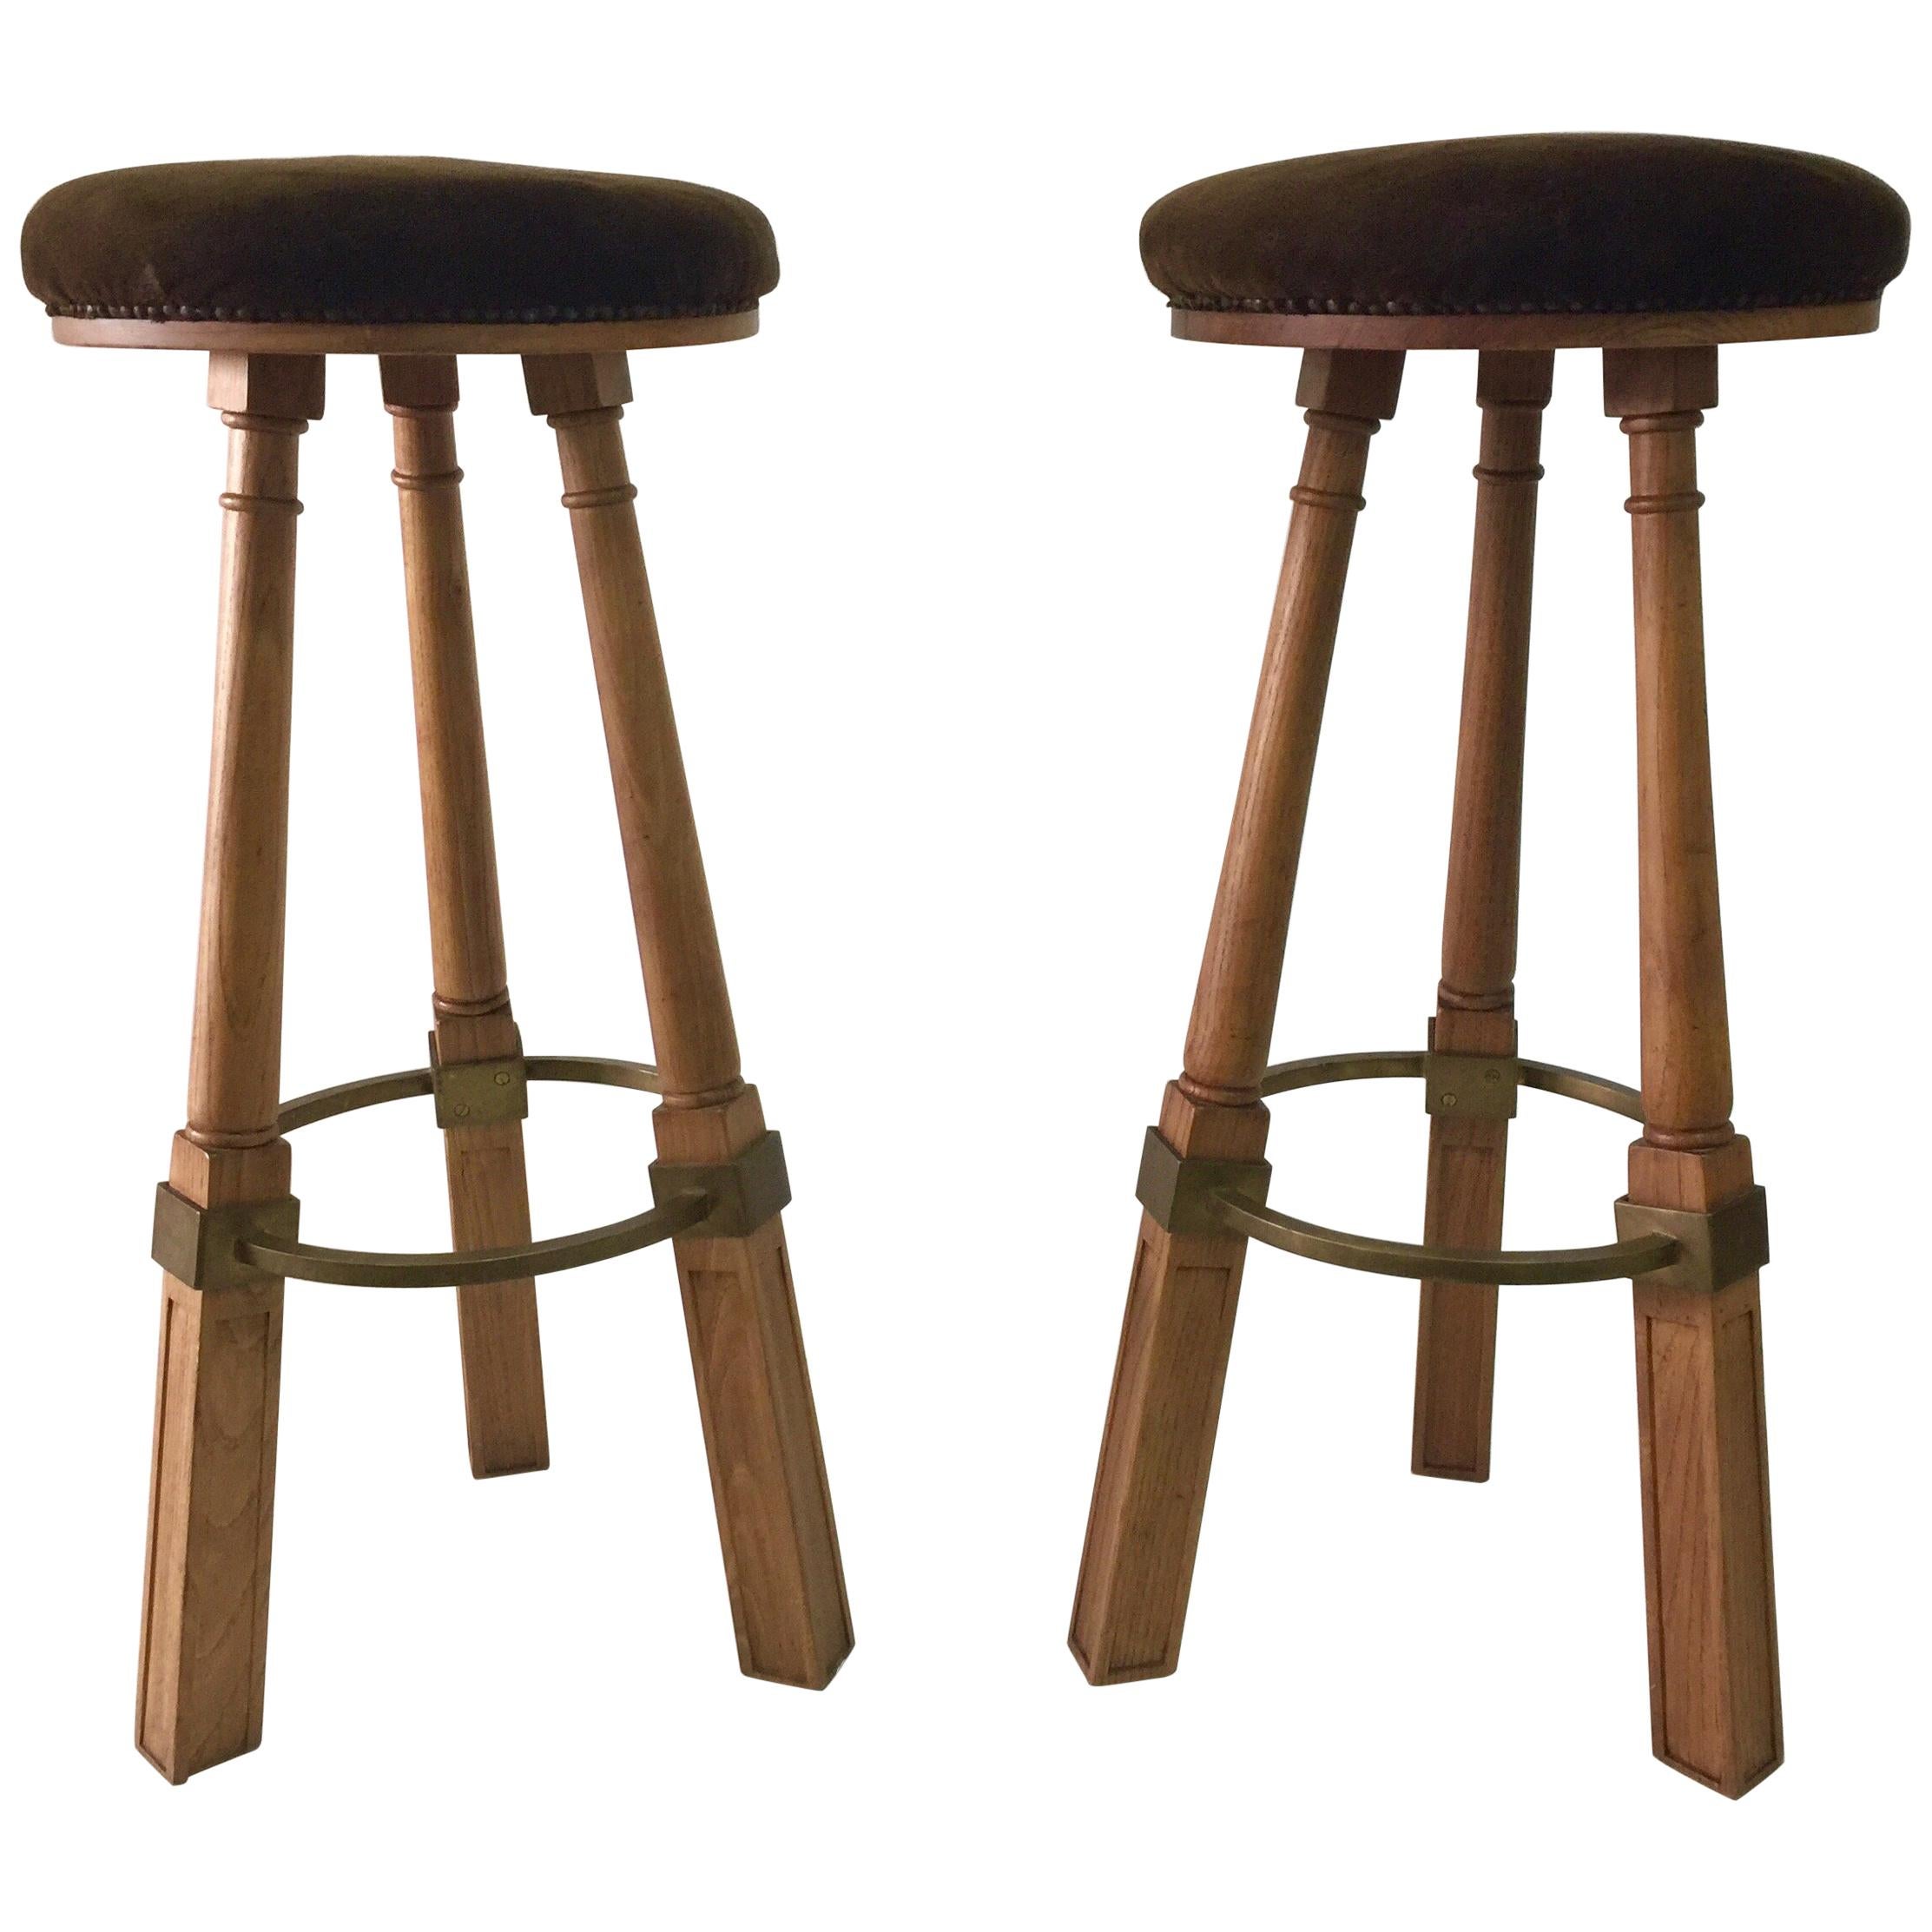 Pair of French Oak Bar Stools, Attributed to Jacques Adnet